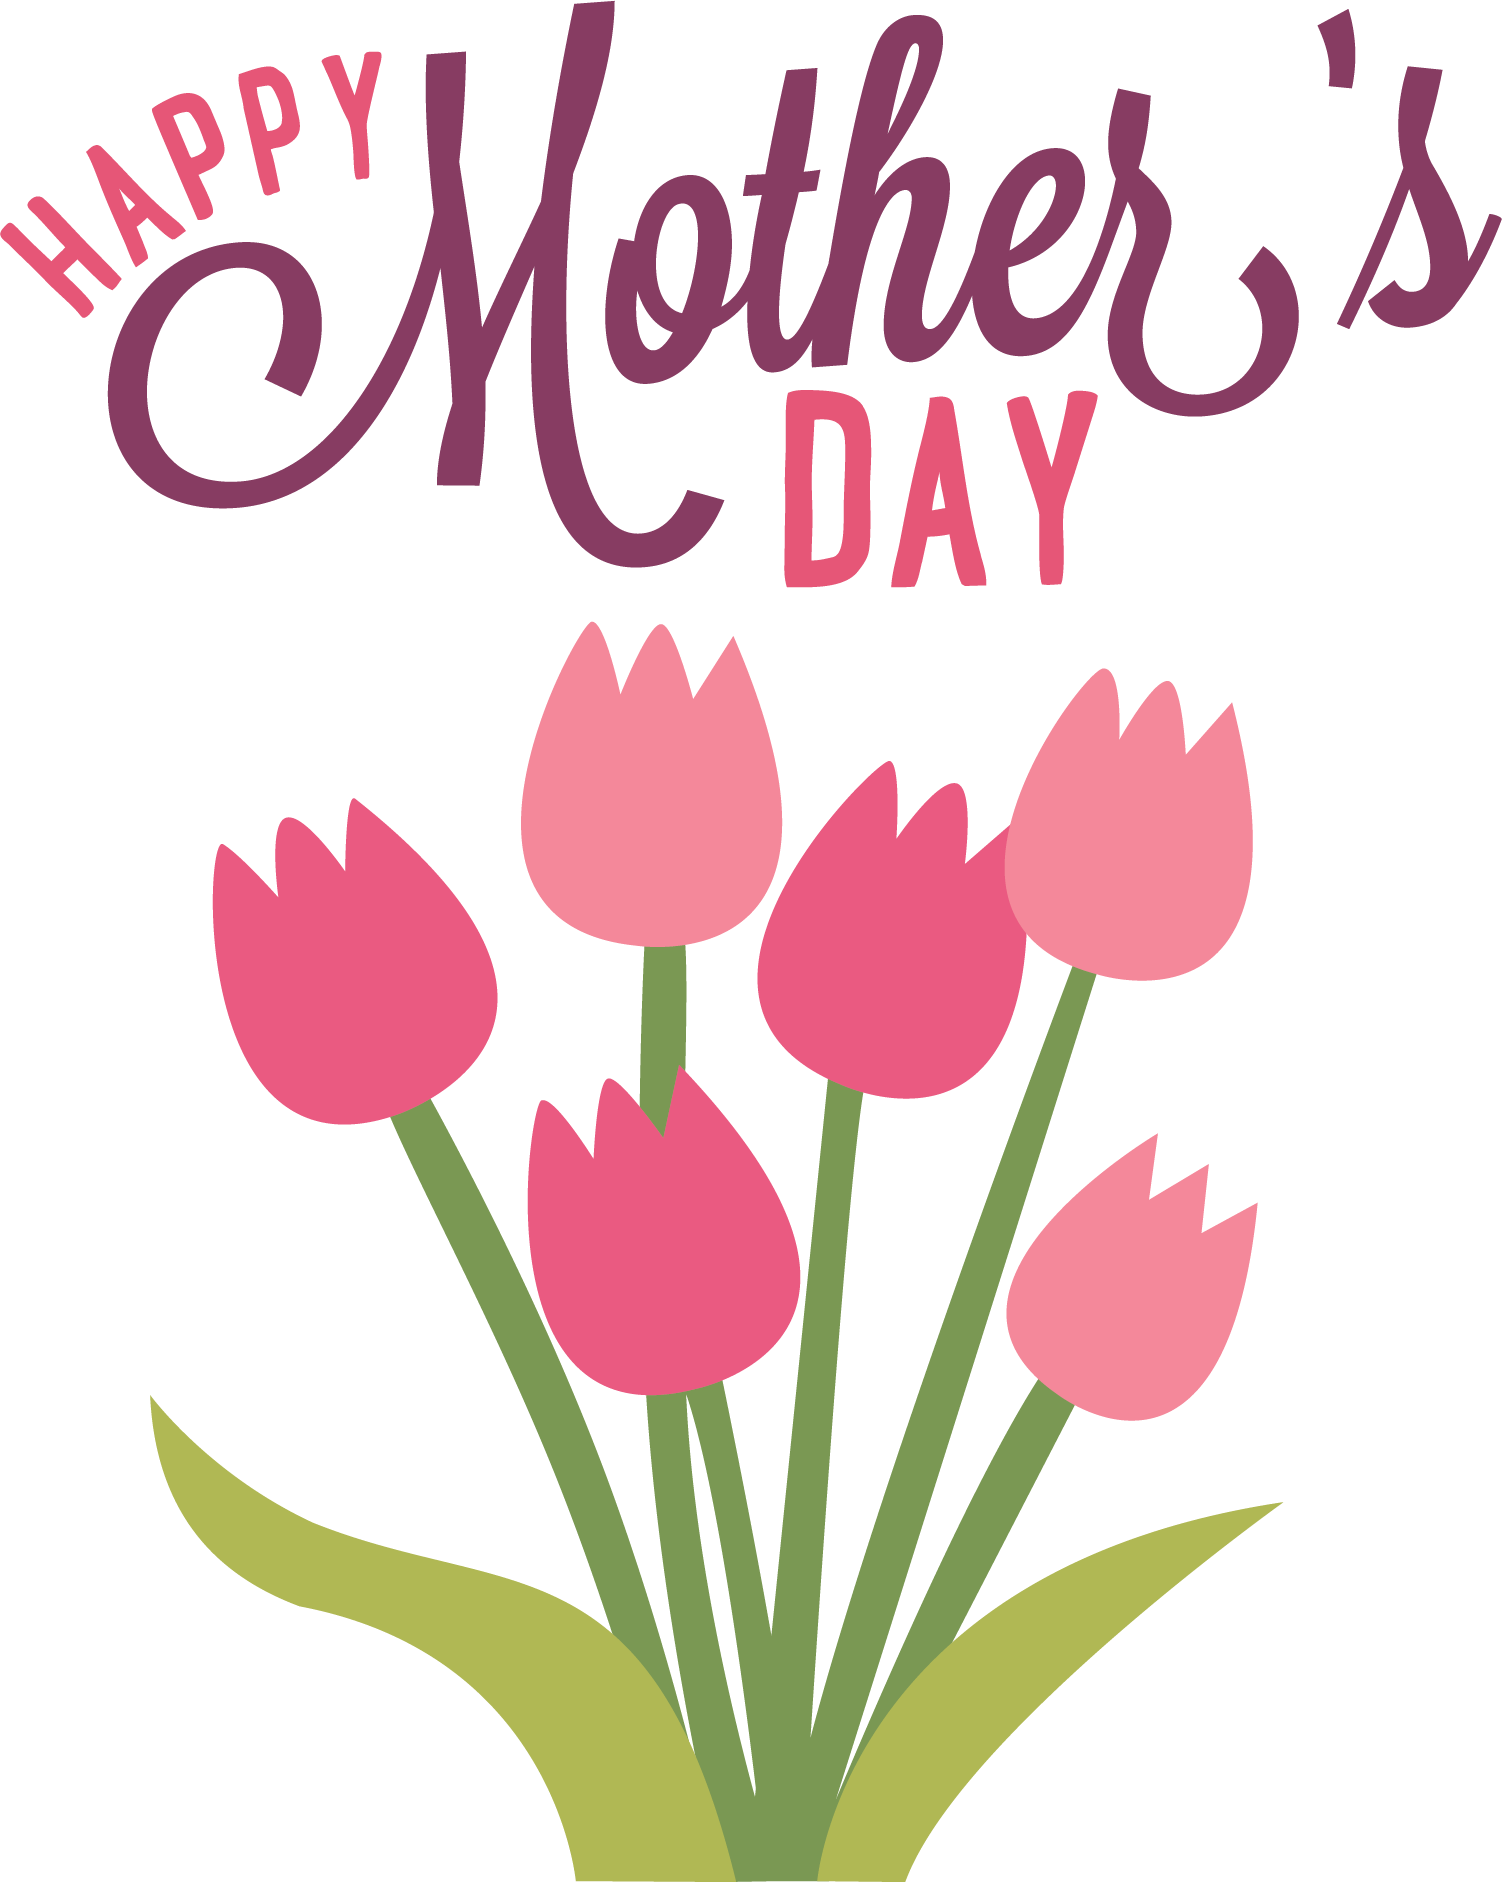 75 mothers day: animated images, gifs, & - %_GIF动态图 - 动态图库网